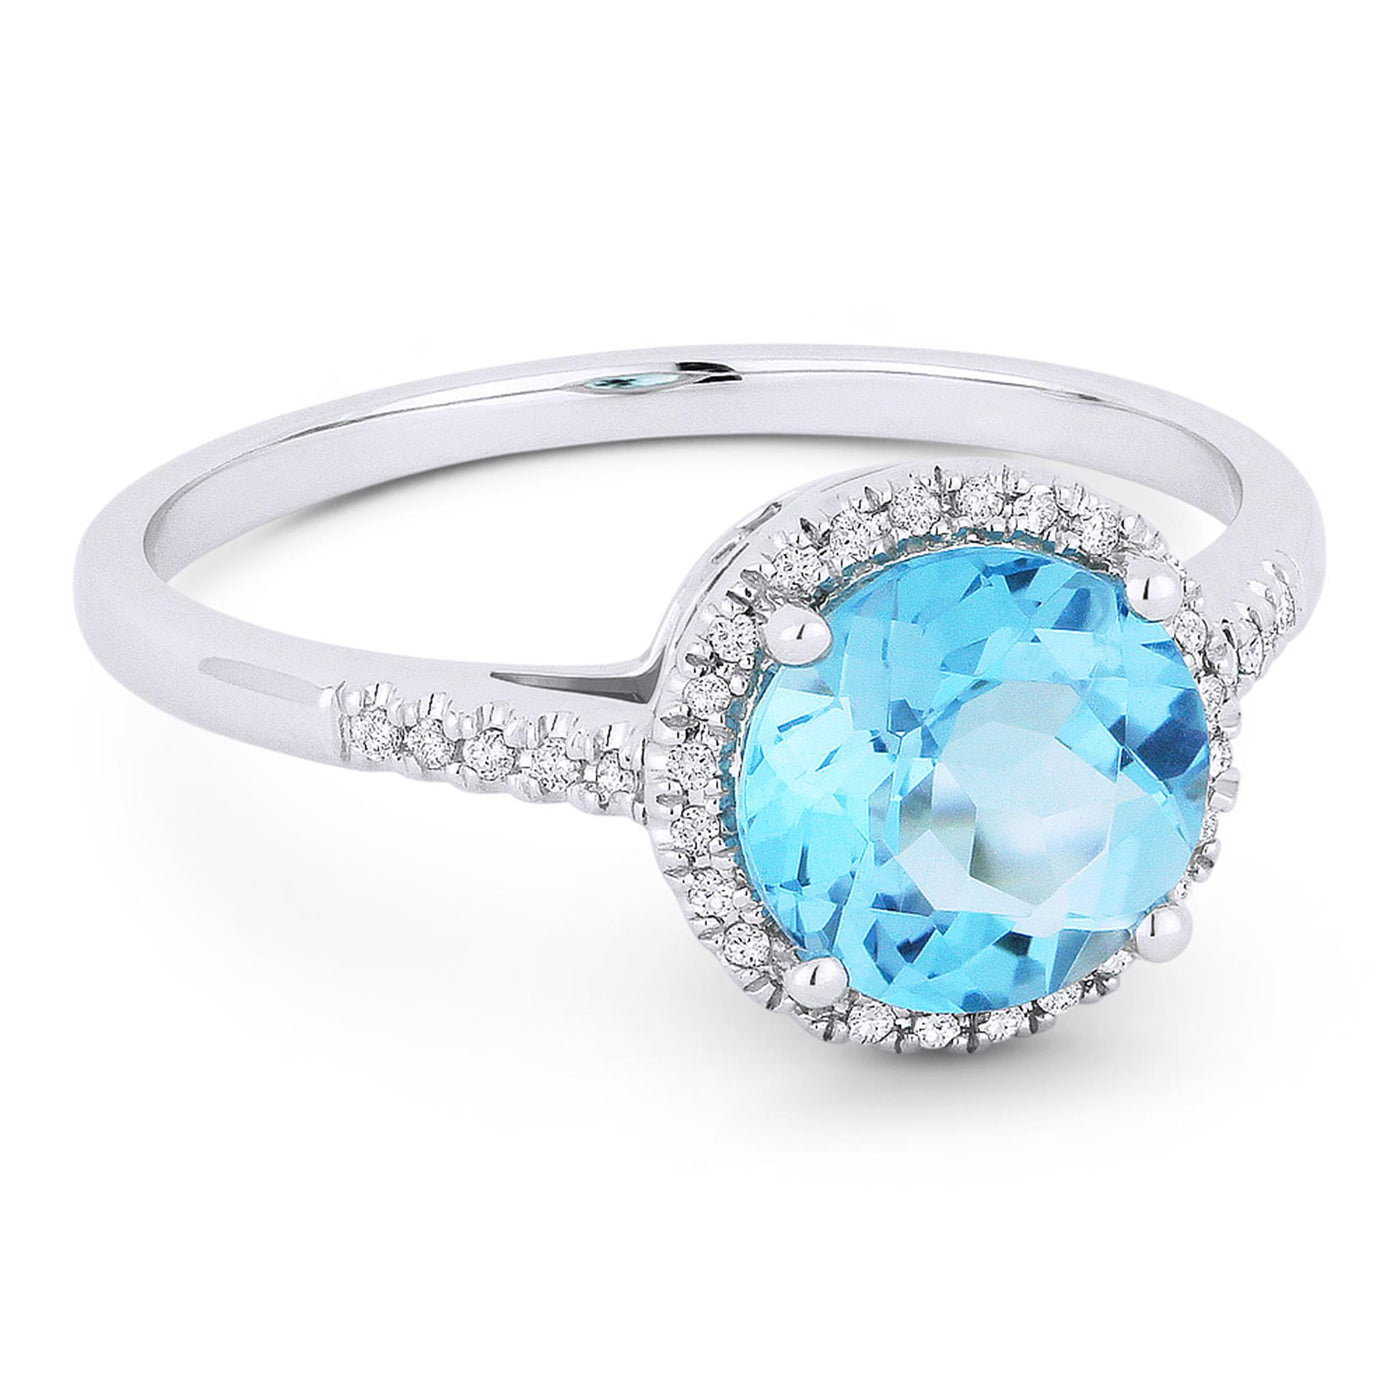 Madison L 14K White Gold 1.54ctw Halo Style Blue Topaz and Diamonds Ring